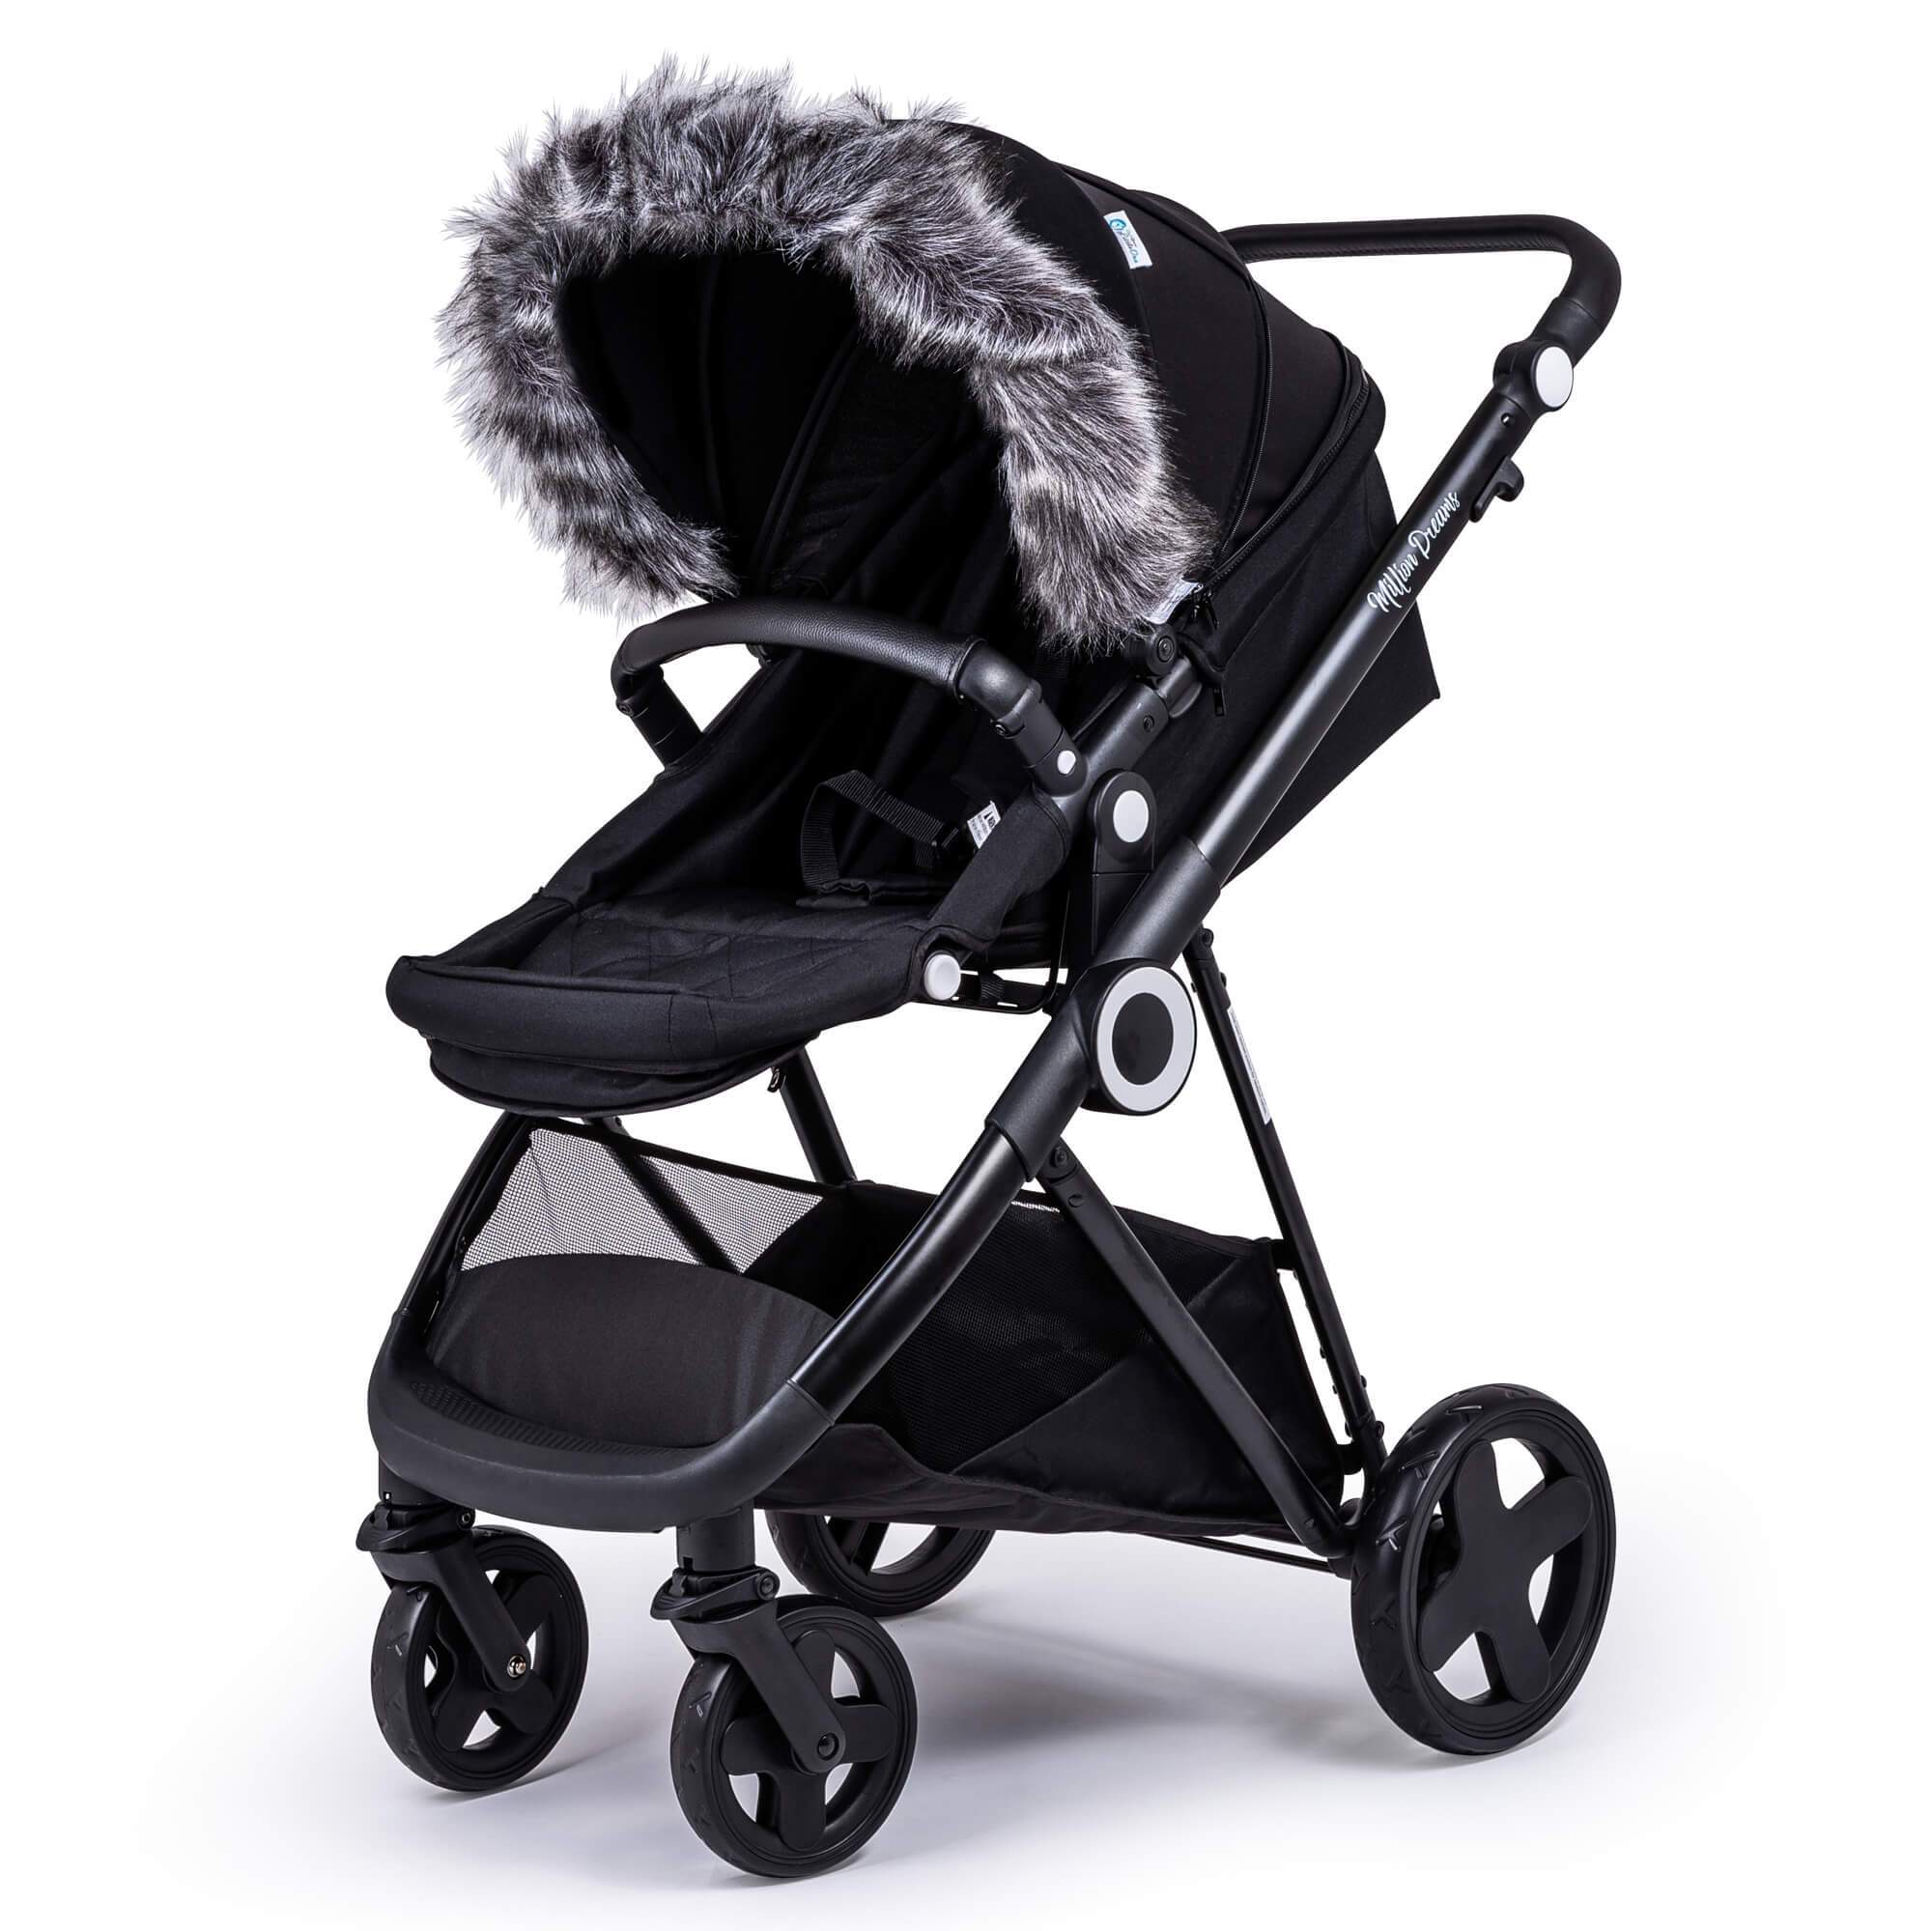 Pram Fur Hood Trim Attachment for Pushchair Compatible with Mutsy - For Your Little One